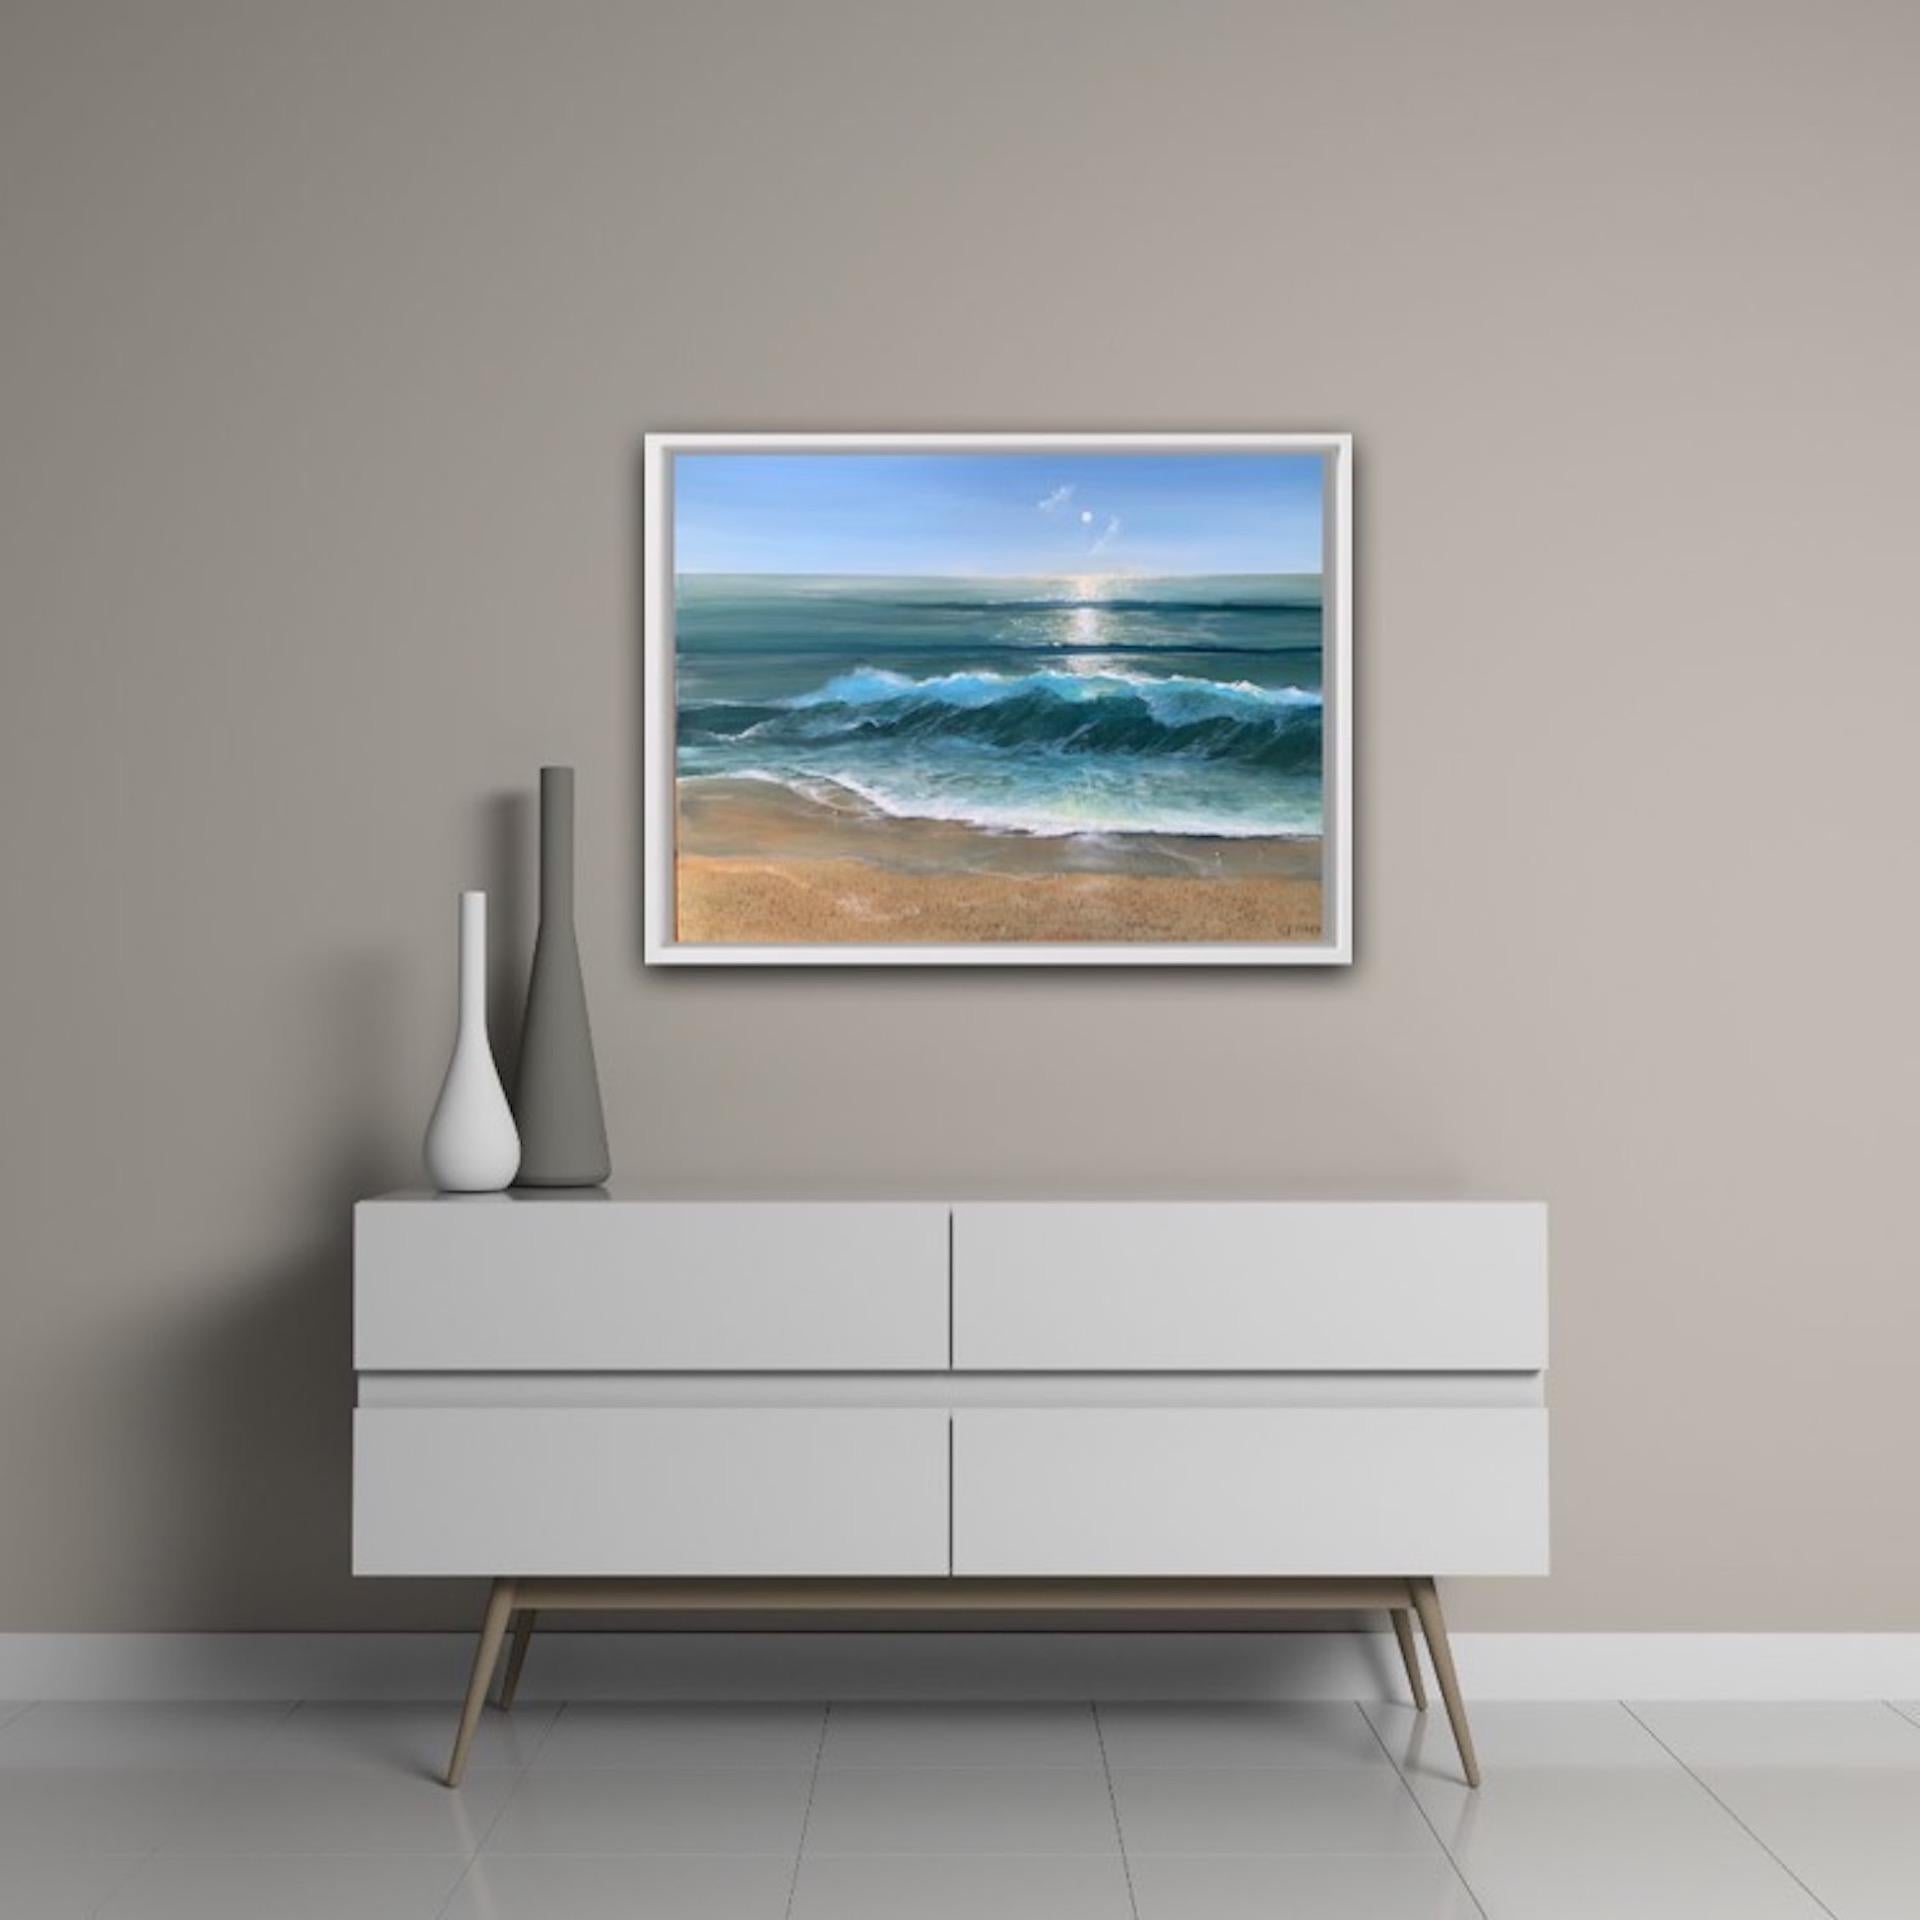 Carolyn Tyrer
Light on the Horizon
Contemporary Seascape Painting
Acrylic Paint on Canvas
Canvas Size: H 60cm x W 80cm
Sold Unframed
Please note that insitu images are purely an indication of how a piece may look

Light on the Horizon is an original